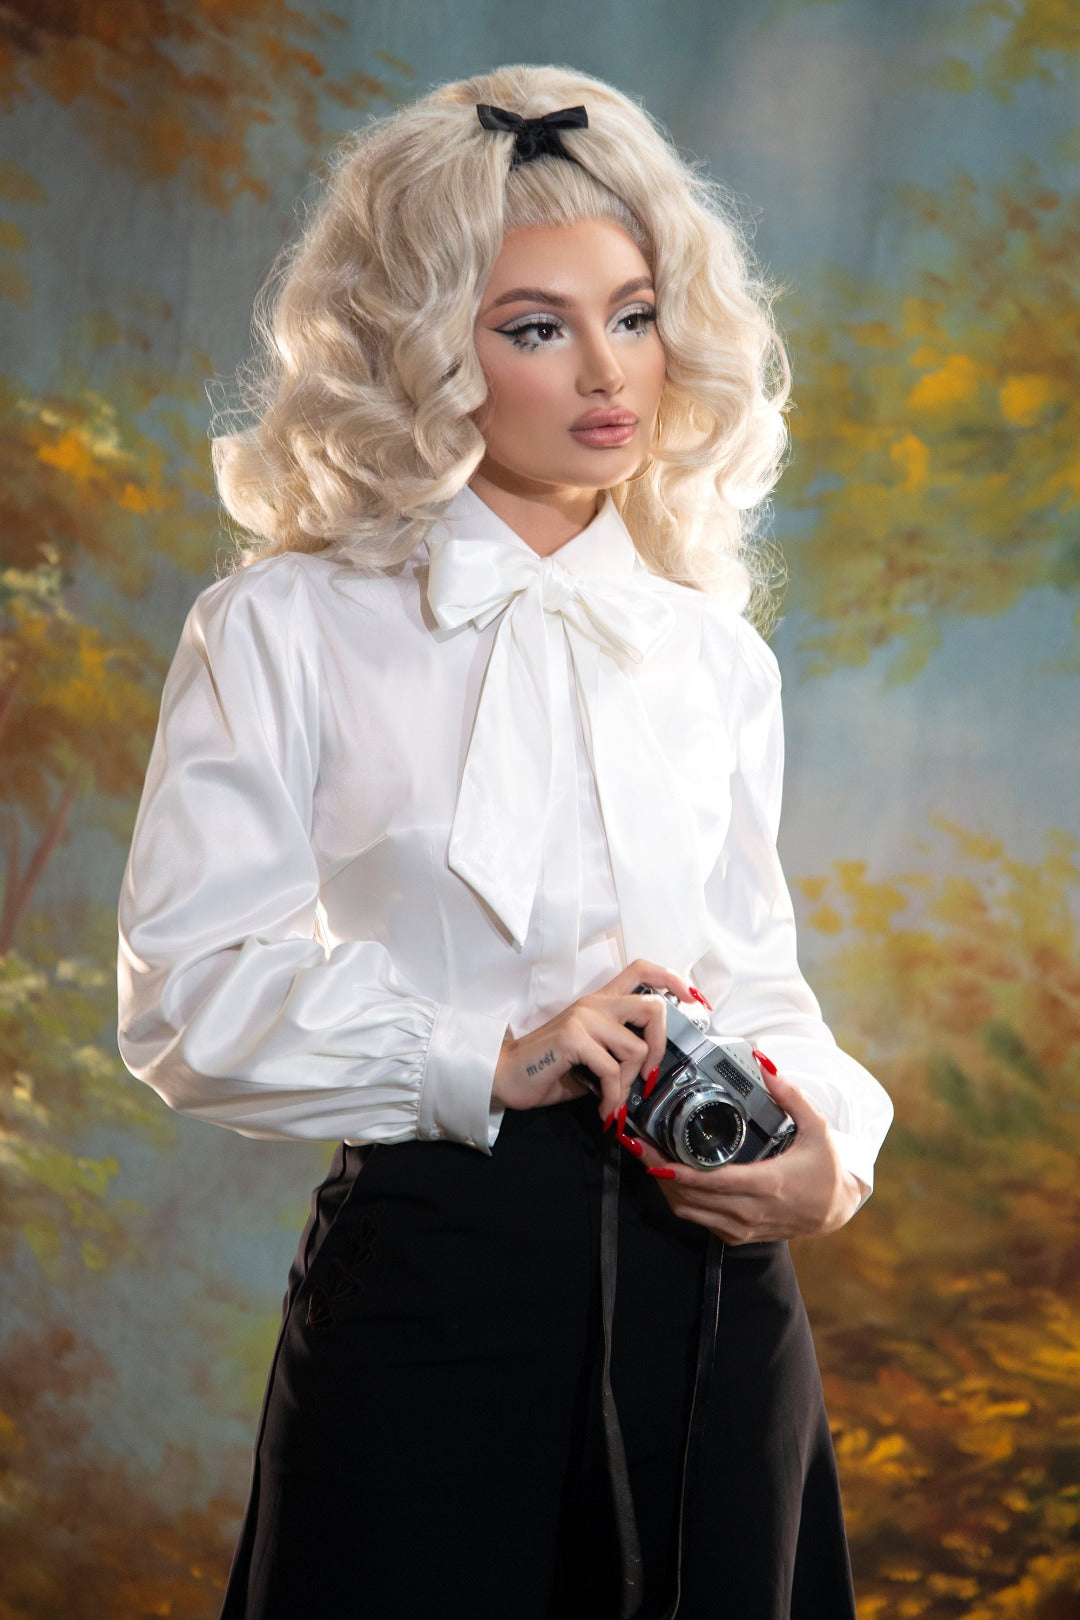 A blond pinup model posing against a yellow and blue painted background while wearing the Angela Blouse in white and black trousers with an old camera on her hand.